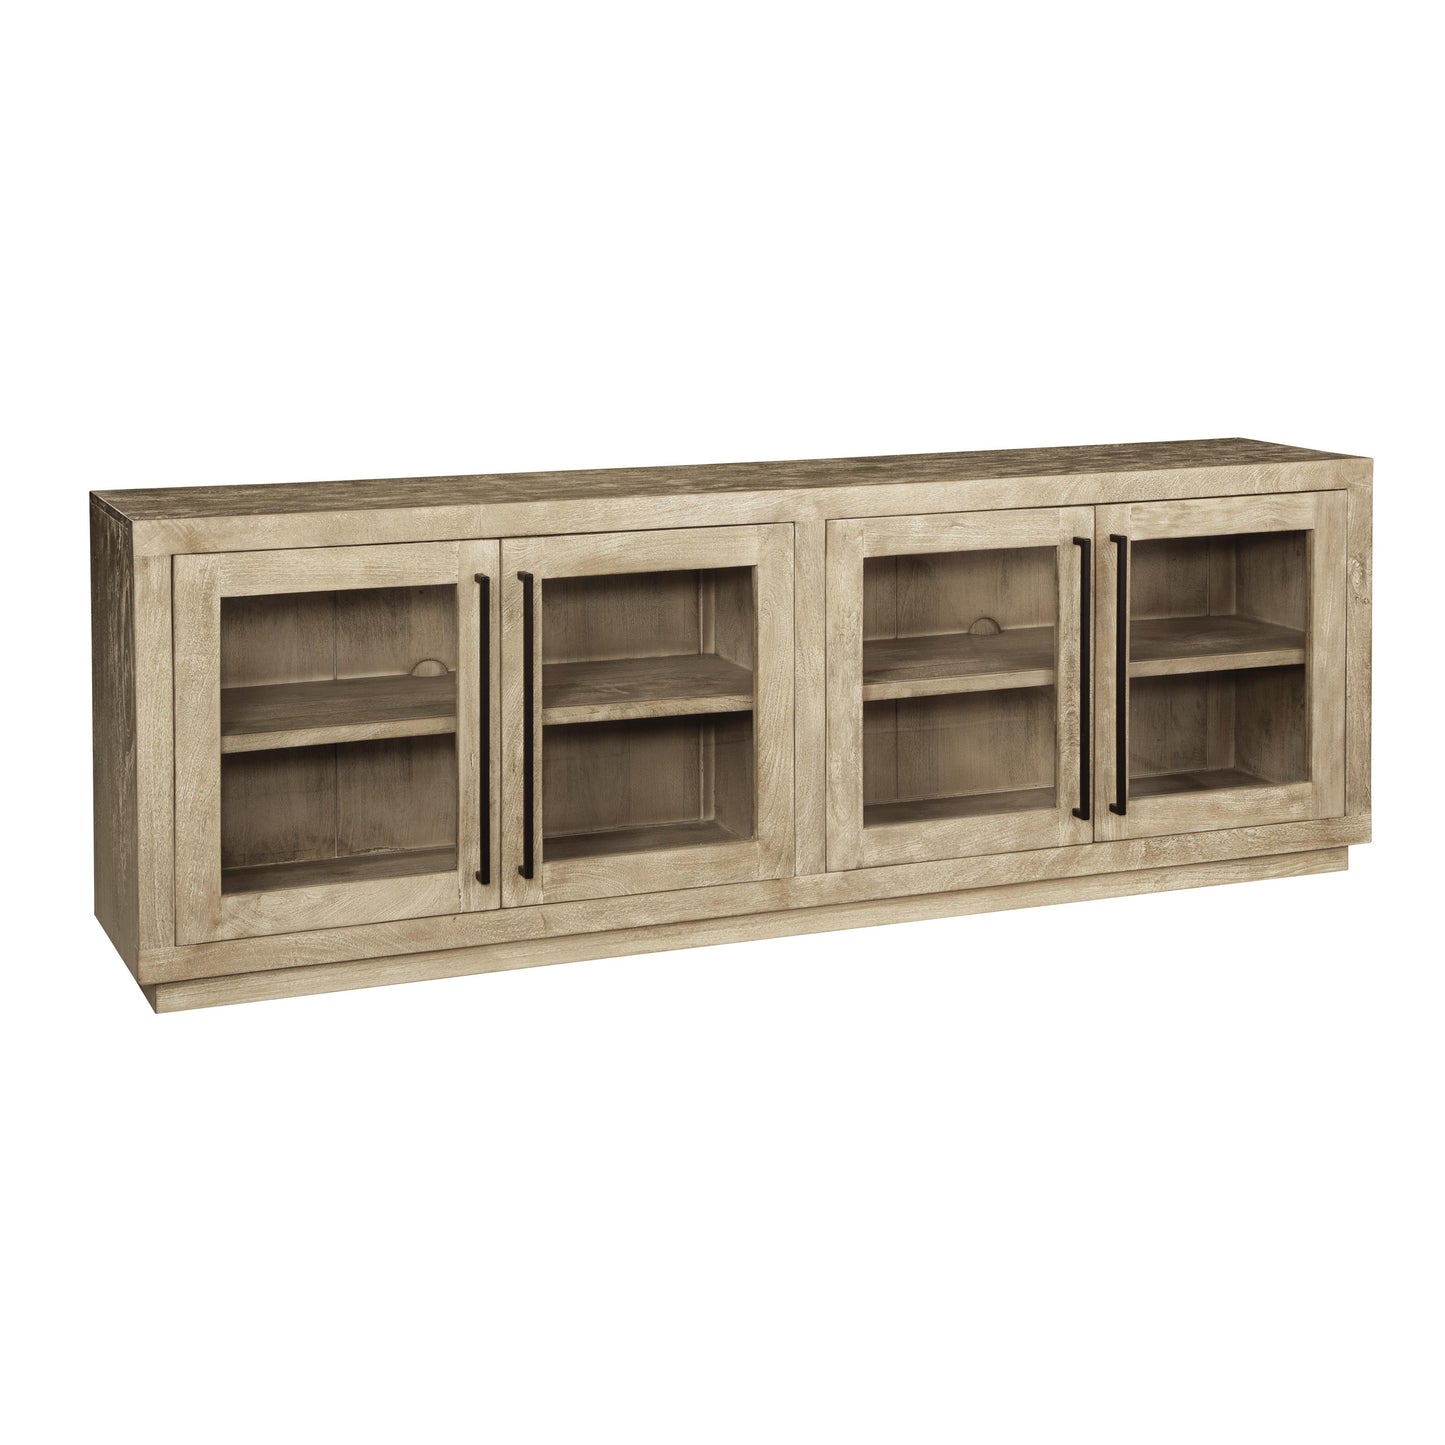 Signature Design by Ashley Accent Cabinets Cabinets A4000411 IMAGE 1